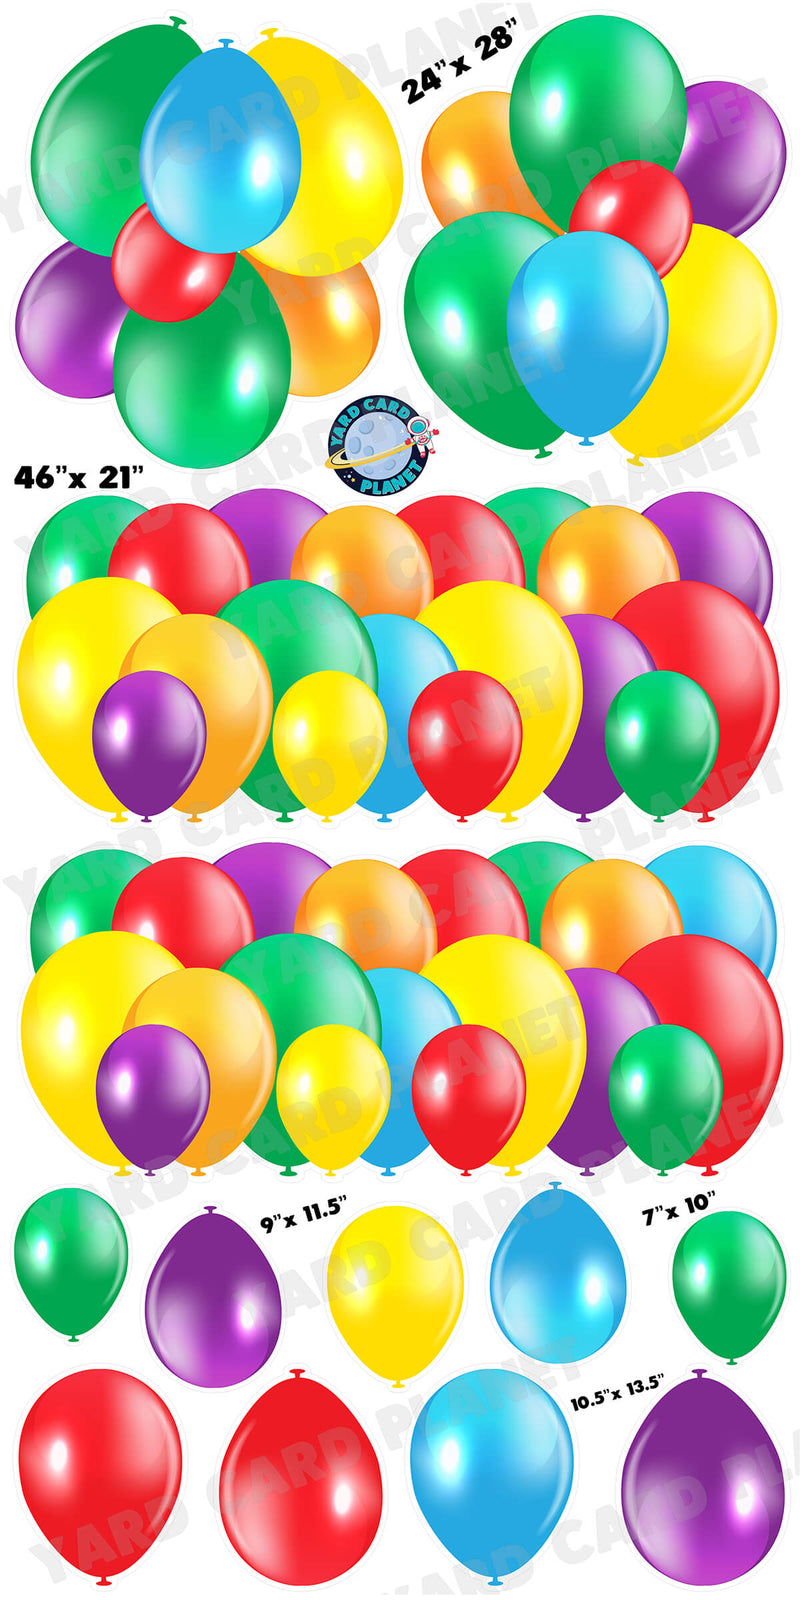 Color Wheel Balloon Panels, Bouquets and Singles Yard Card Set with Measurements